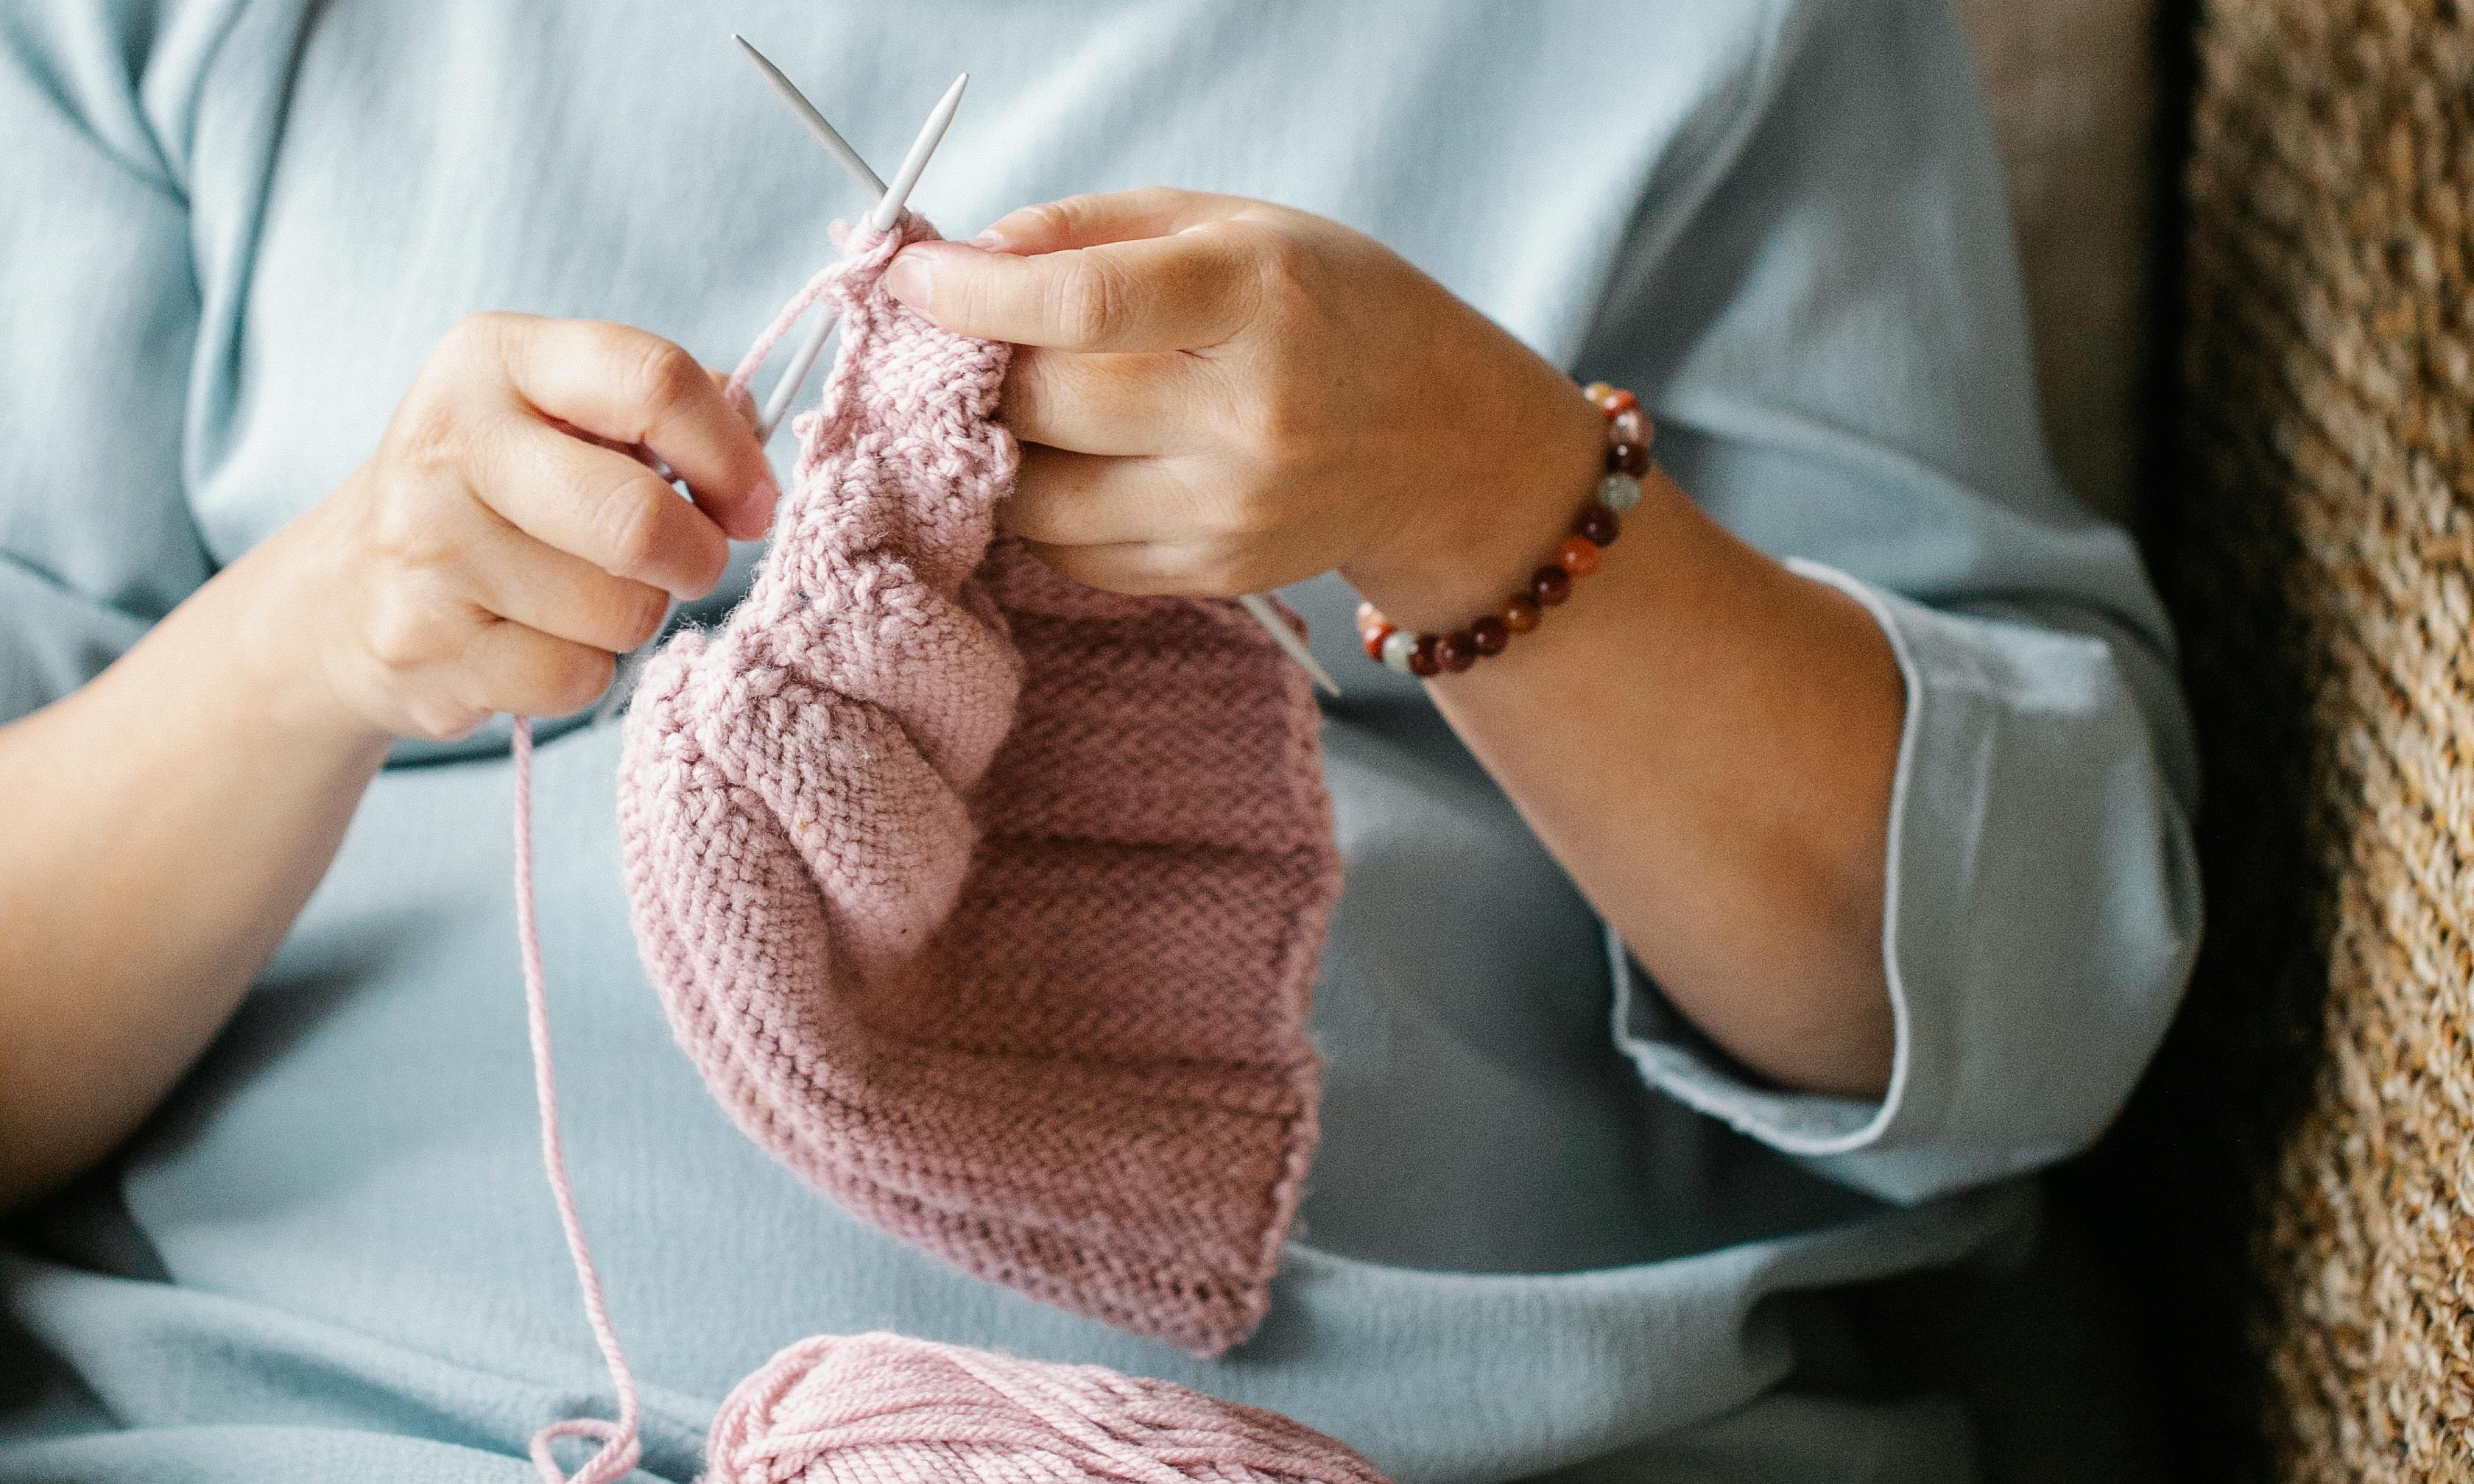 Gran knitting by the window | Source: Pexels